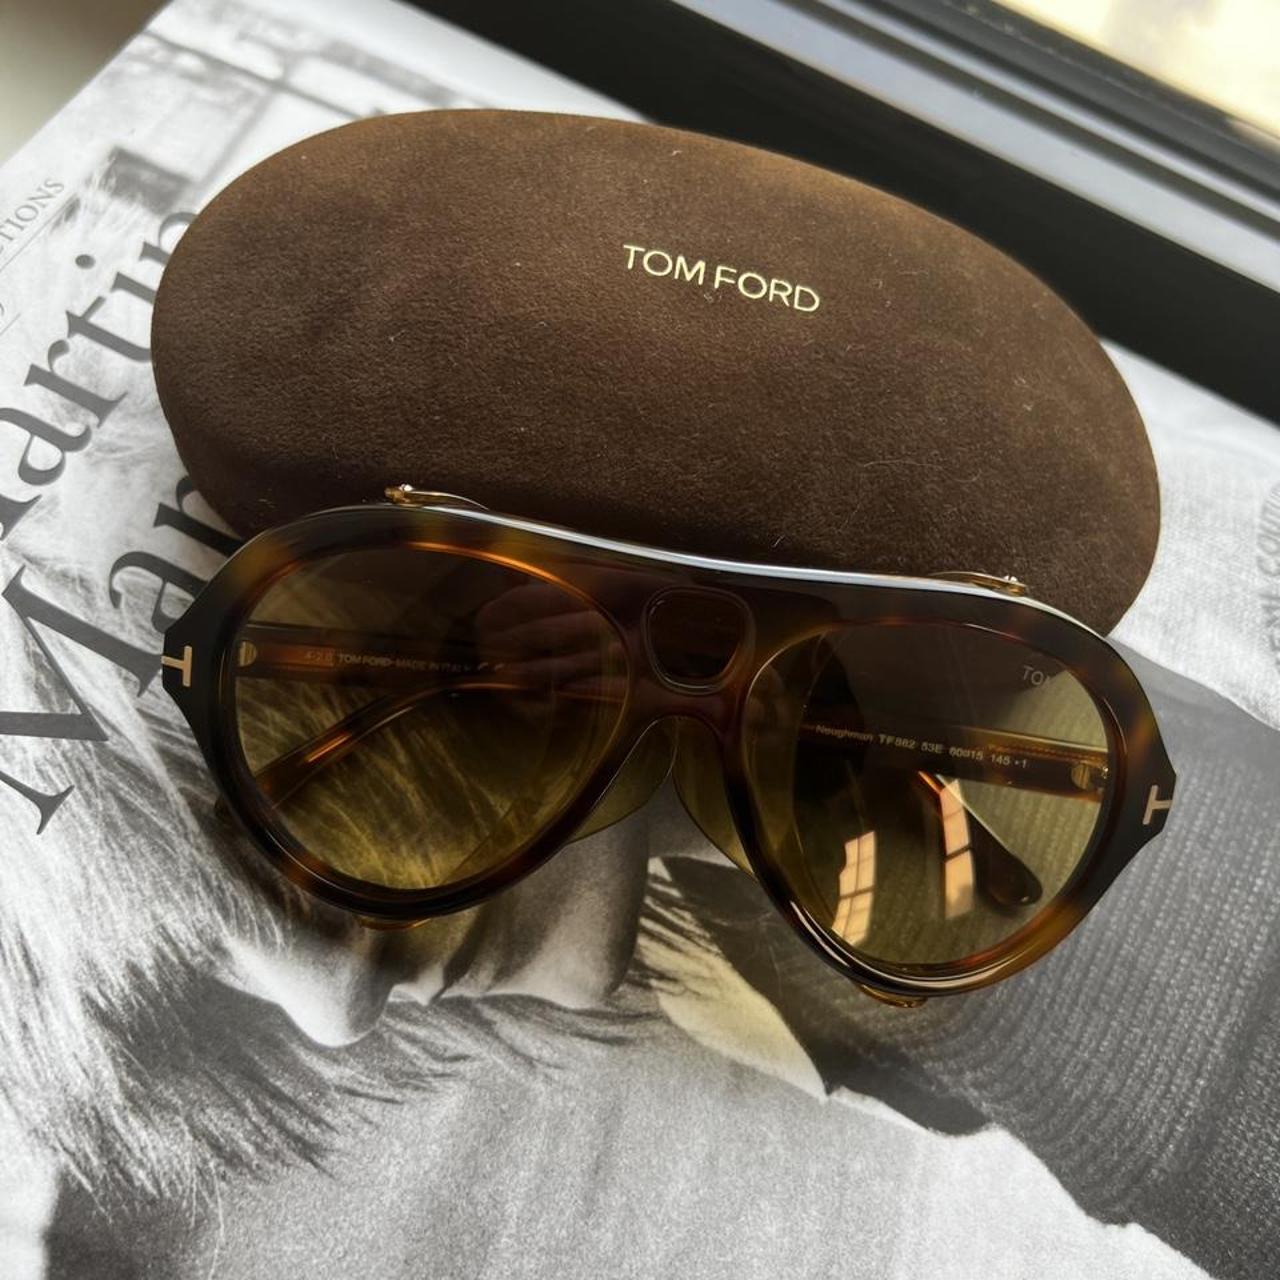 TOM FORD Women's Brown and Yellow Sunglasses